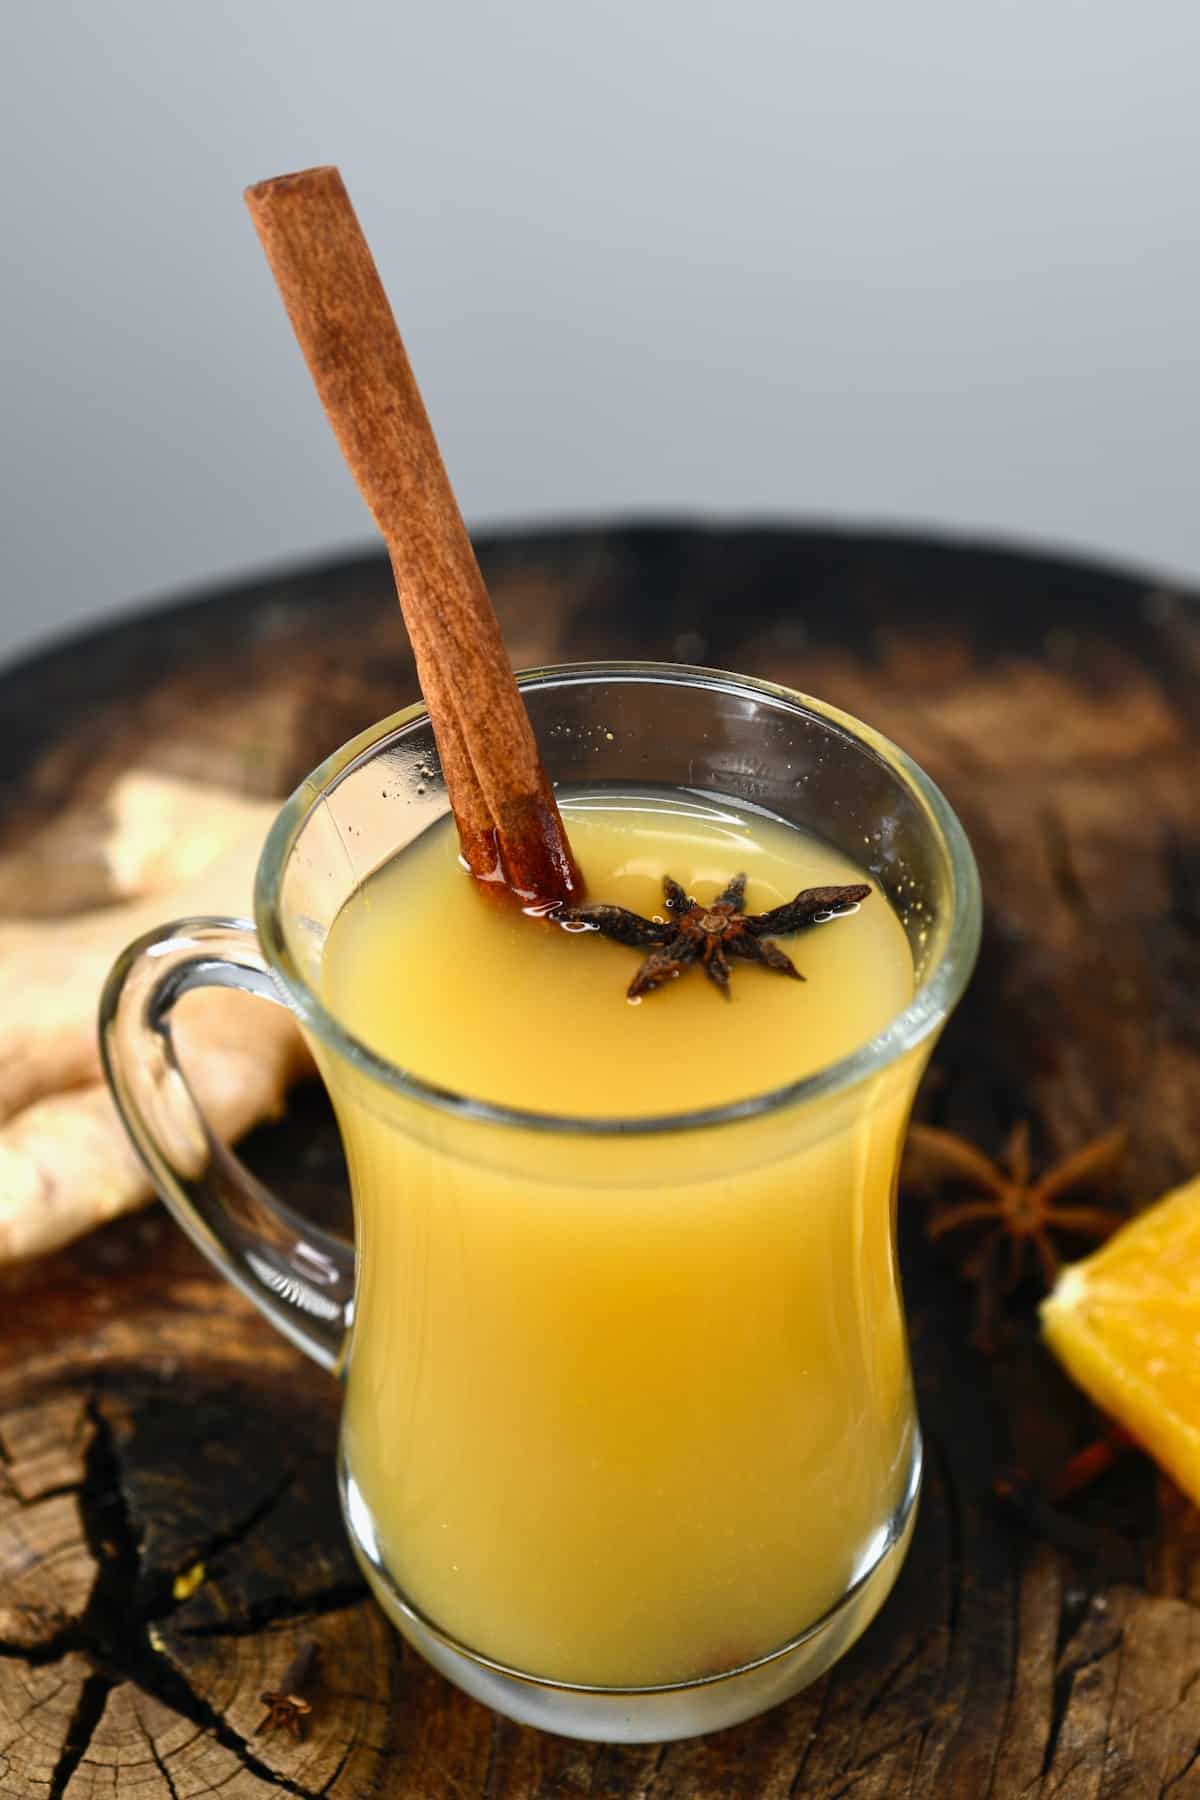 A glass with spiced apple cider (wassail) and cinnamon stick